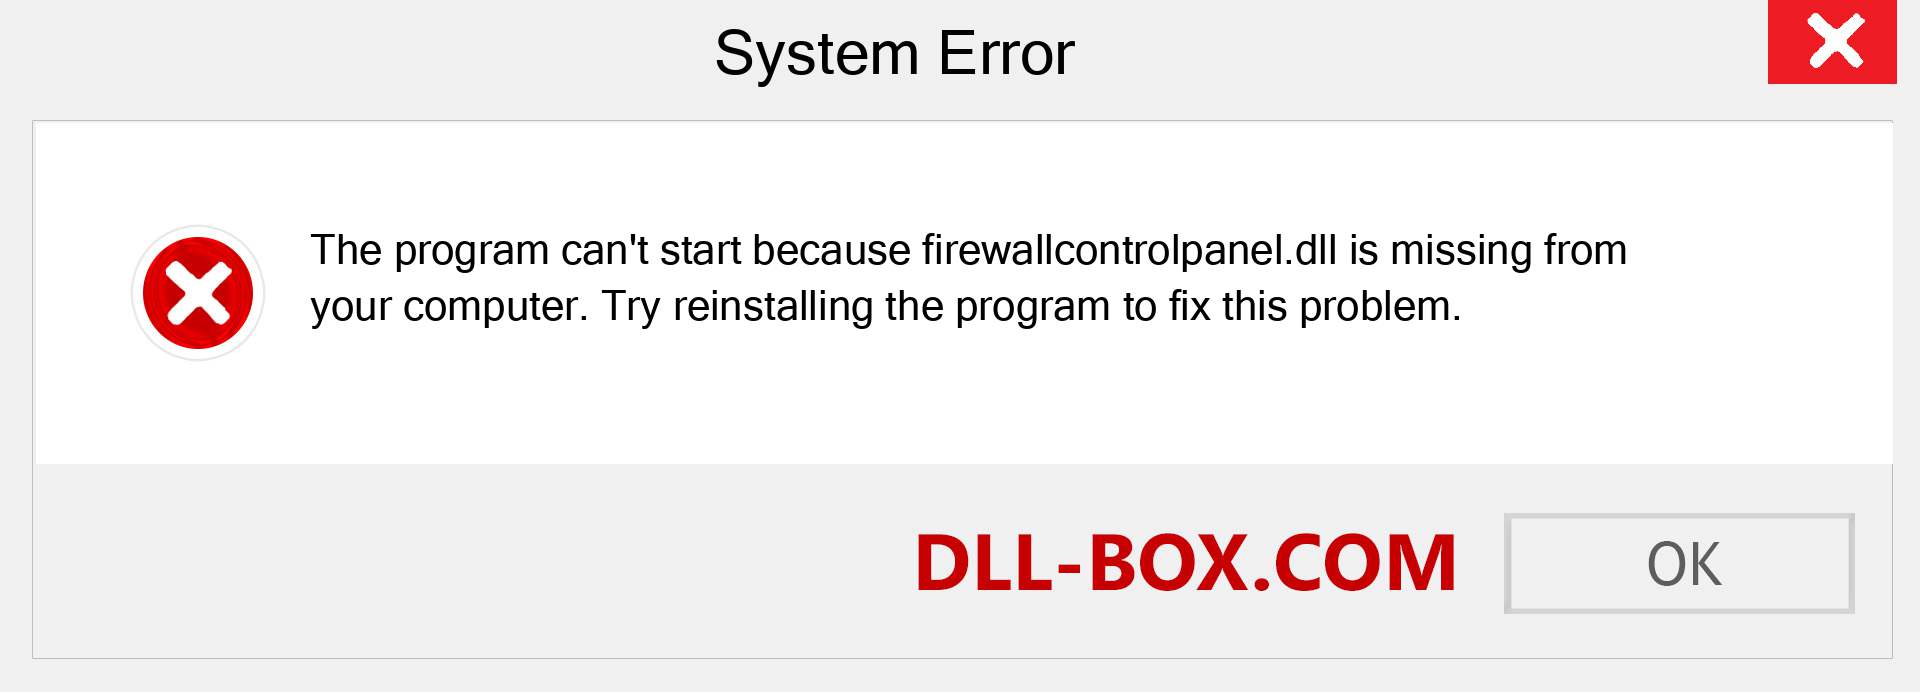  firewallcontrolpanel.dll file is missing?. Download for Windows 7, 8, 10 - Fix  firewallcontrolpanel dll Missing Error on Windows, photos, images